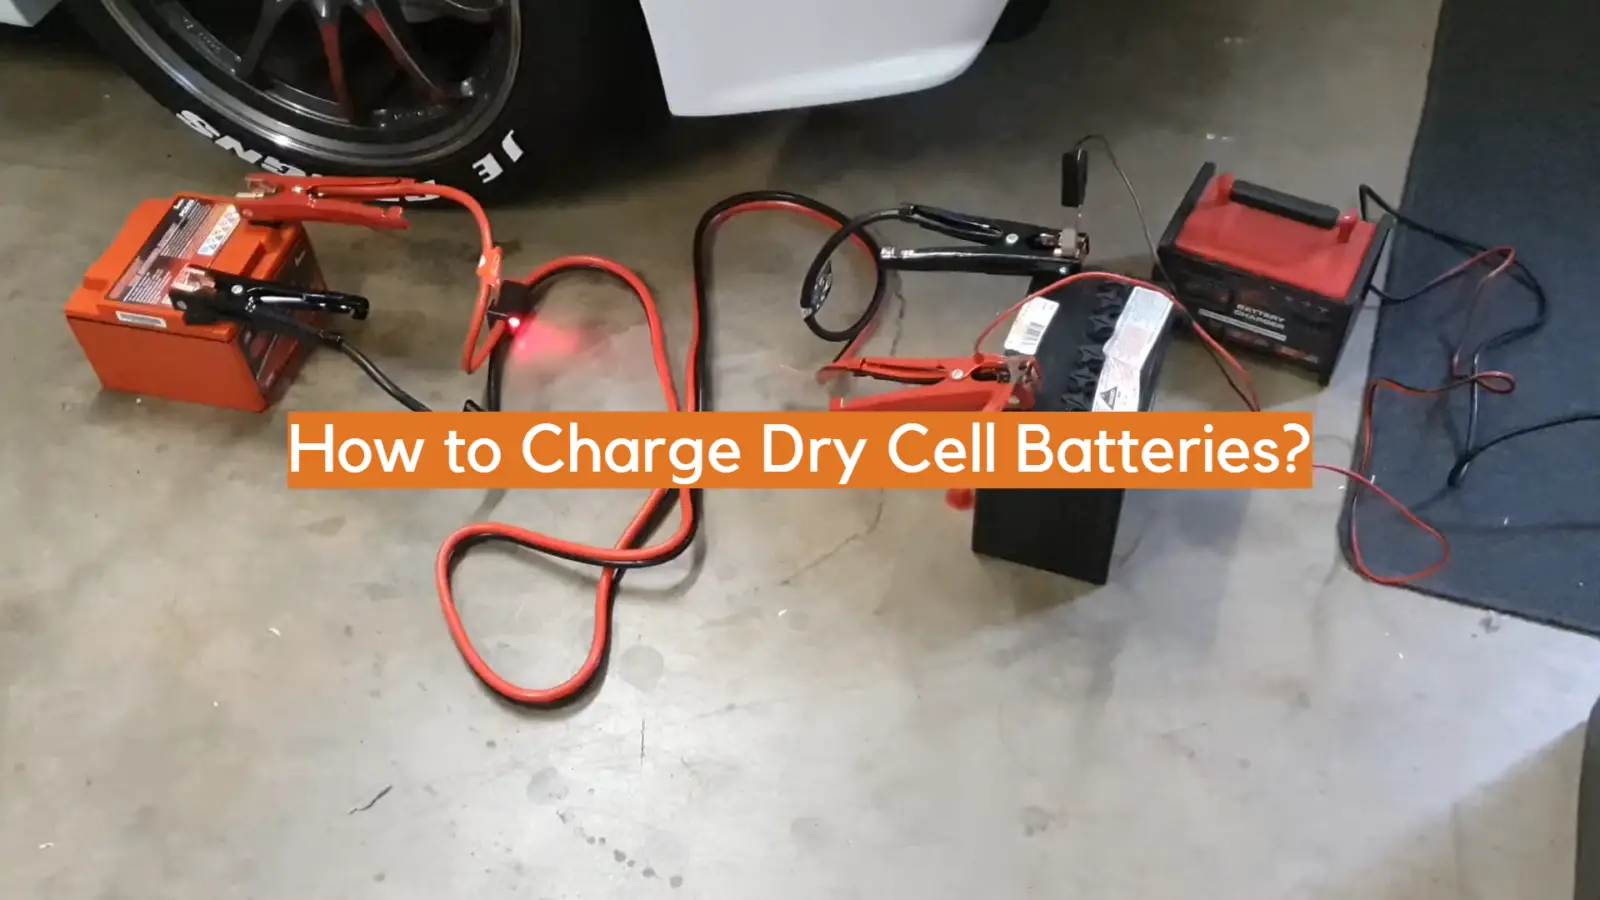 How to Charge Dry Cell Batteries?